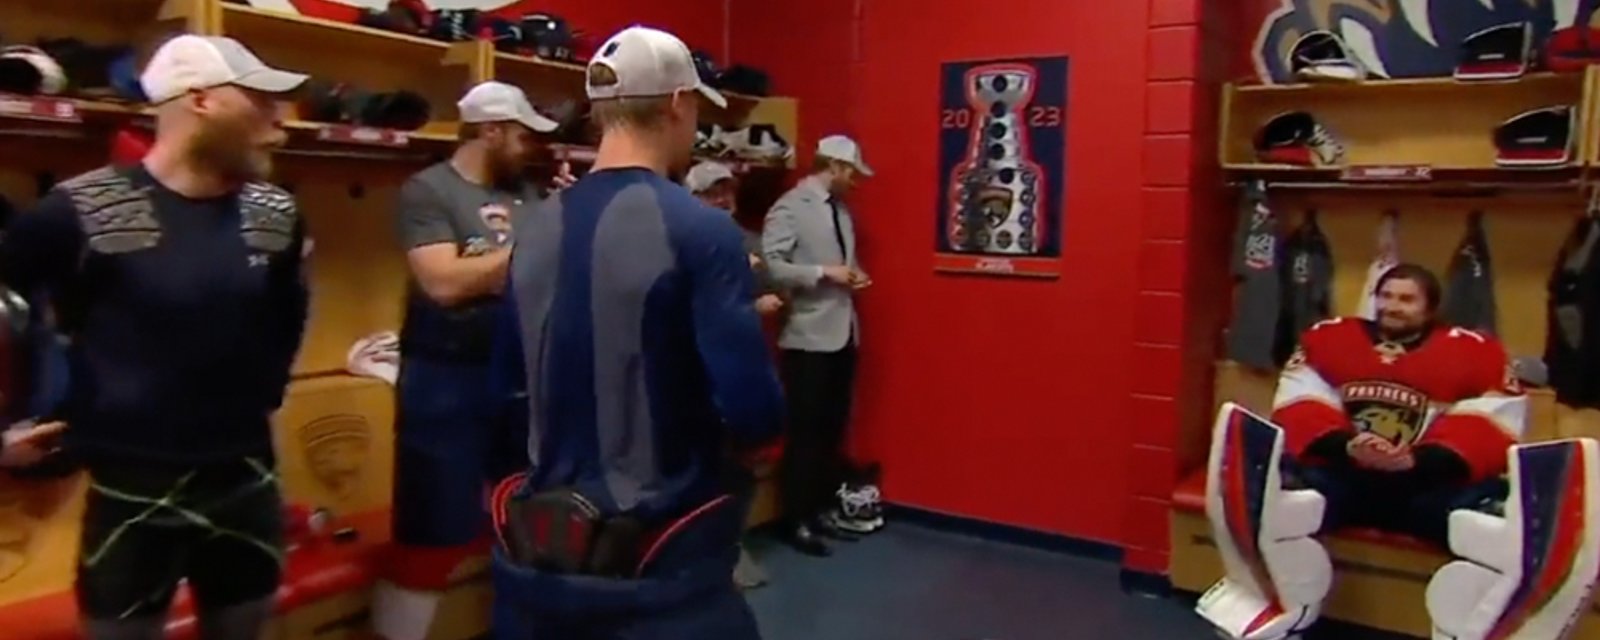 An emotional Bobrovsky sobs after Panthers clinch Stanley Cup Final berth